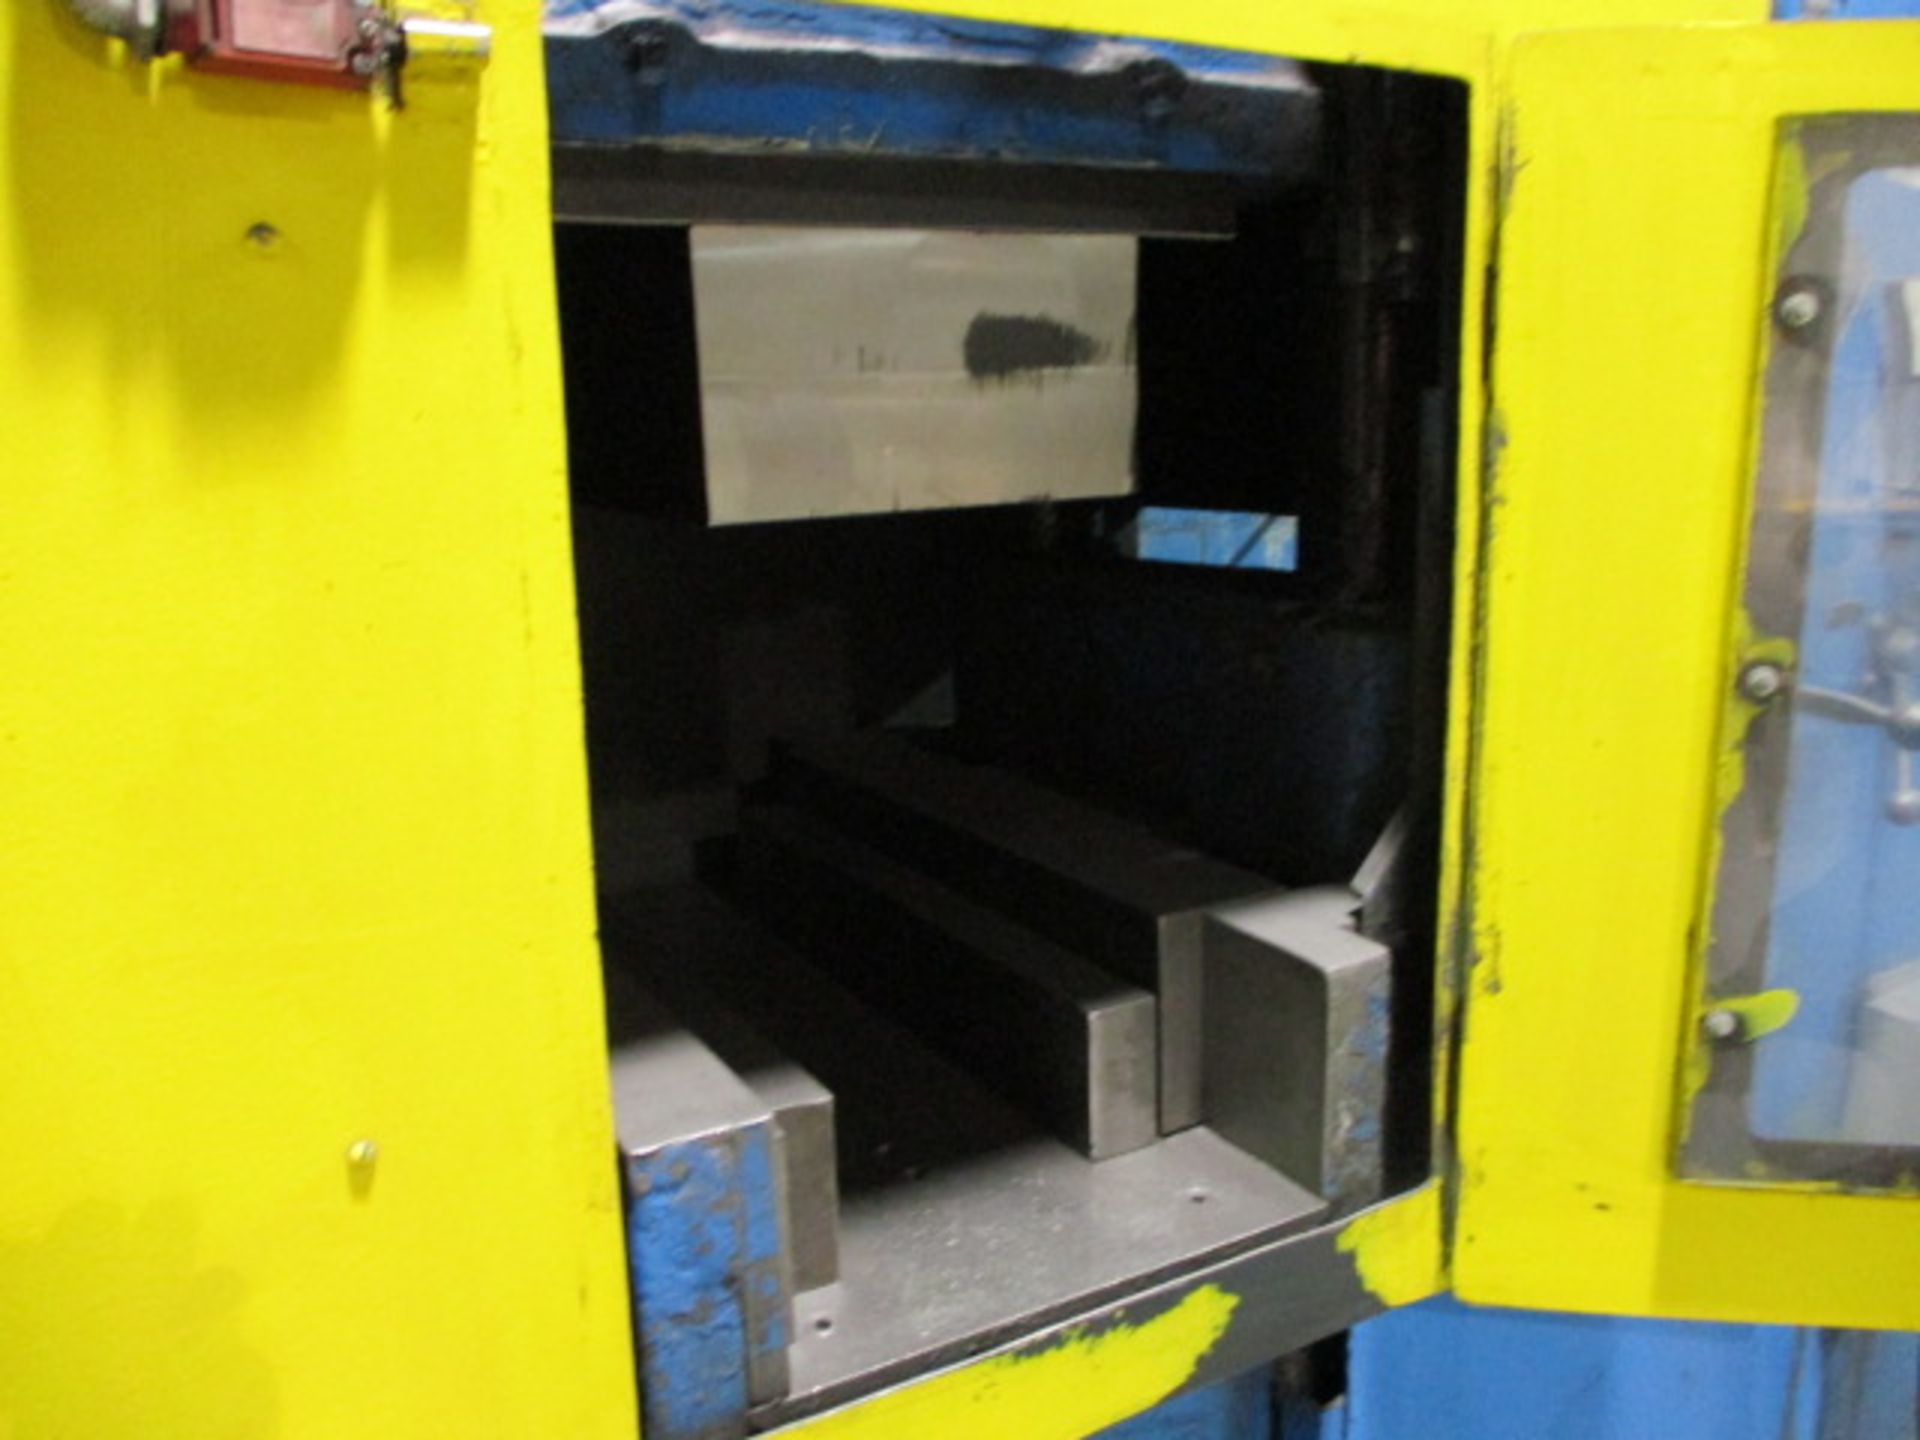 Mohr/Modern Hydraulic Corp 200 Ton IR Side Compaction Press - Image 6 of 7